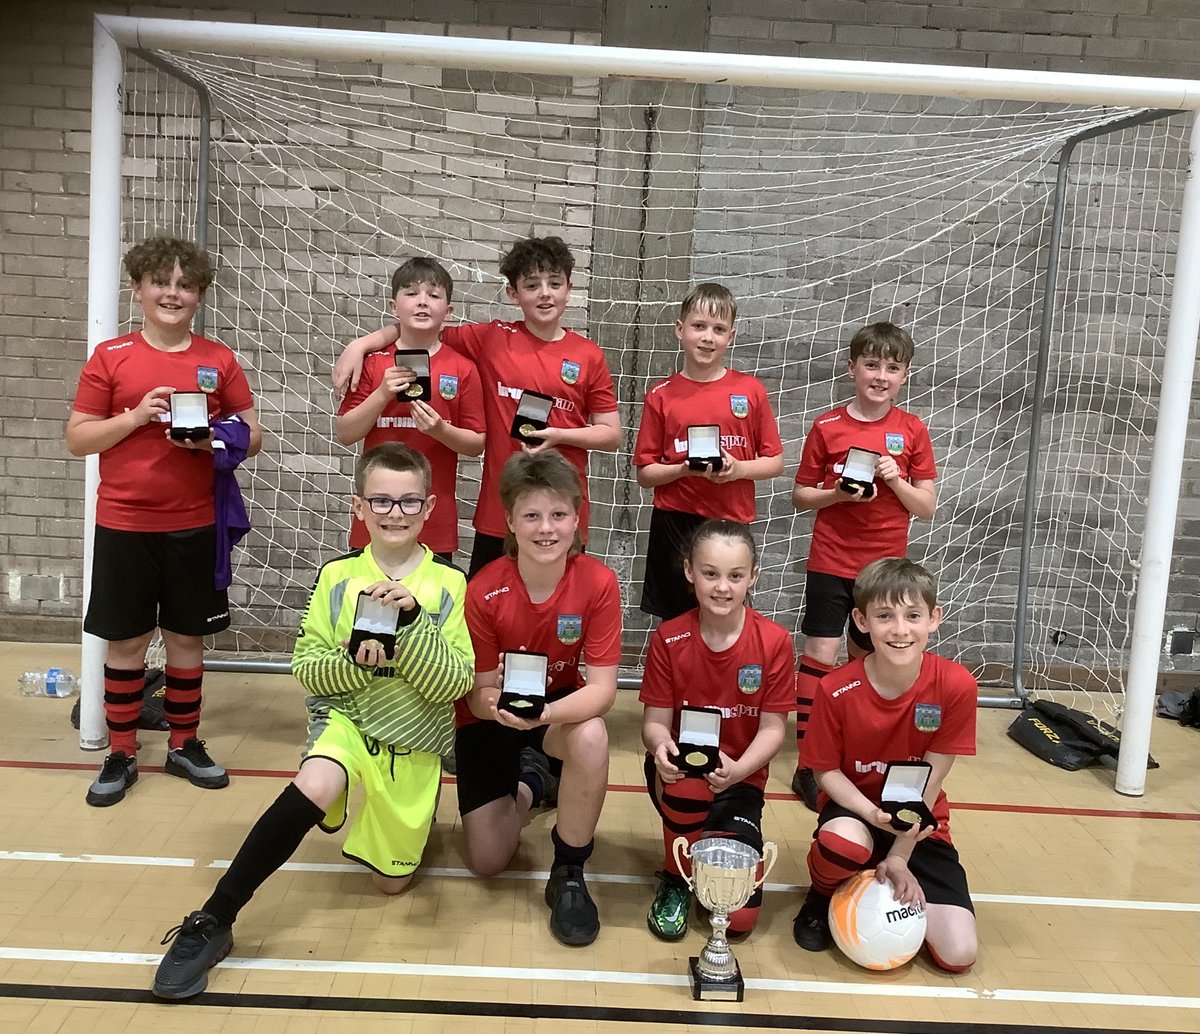 Our Dee Valley Federation Football team were fantastic at the festival which was brilliantly organised by @CefnCouncil. We were proud of how our team came together and made memories that will last a lifetime. Well done all 👏 @YDB_Official @PE_YDB @Llan_Rural_Ward @ActiveWrexham